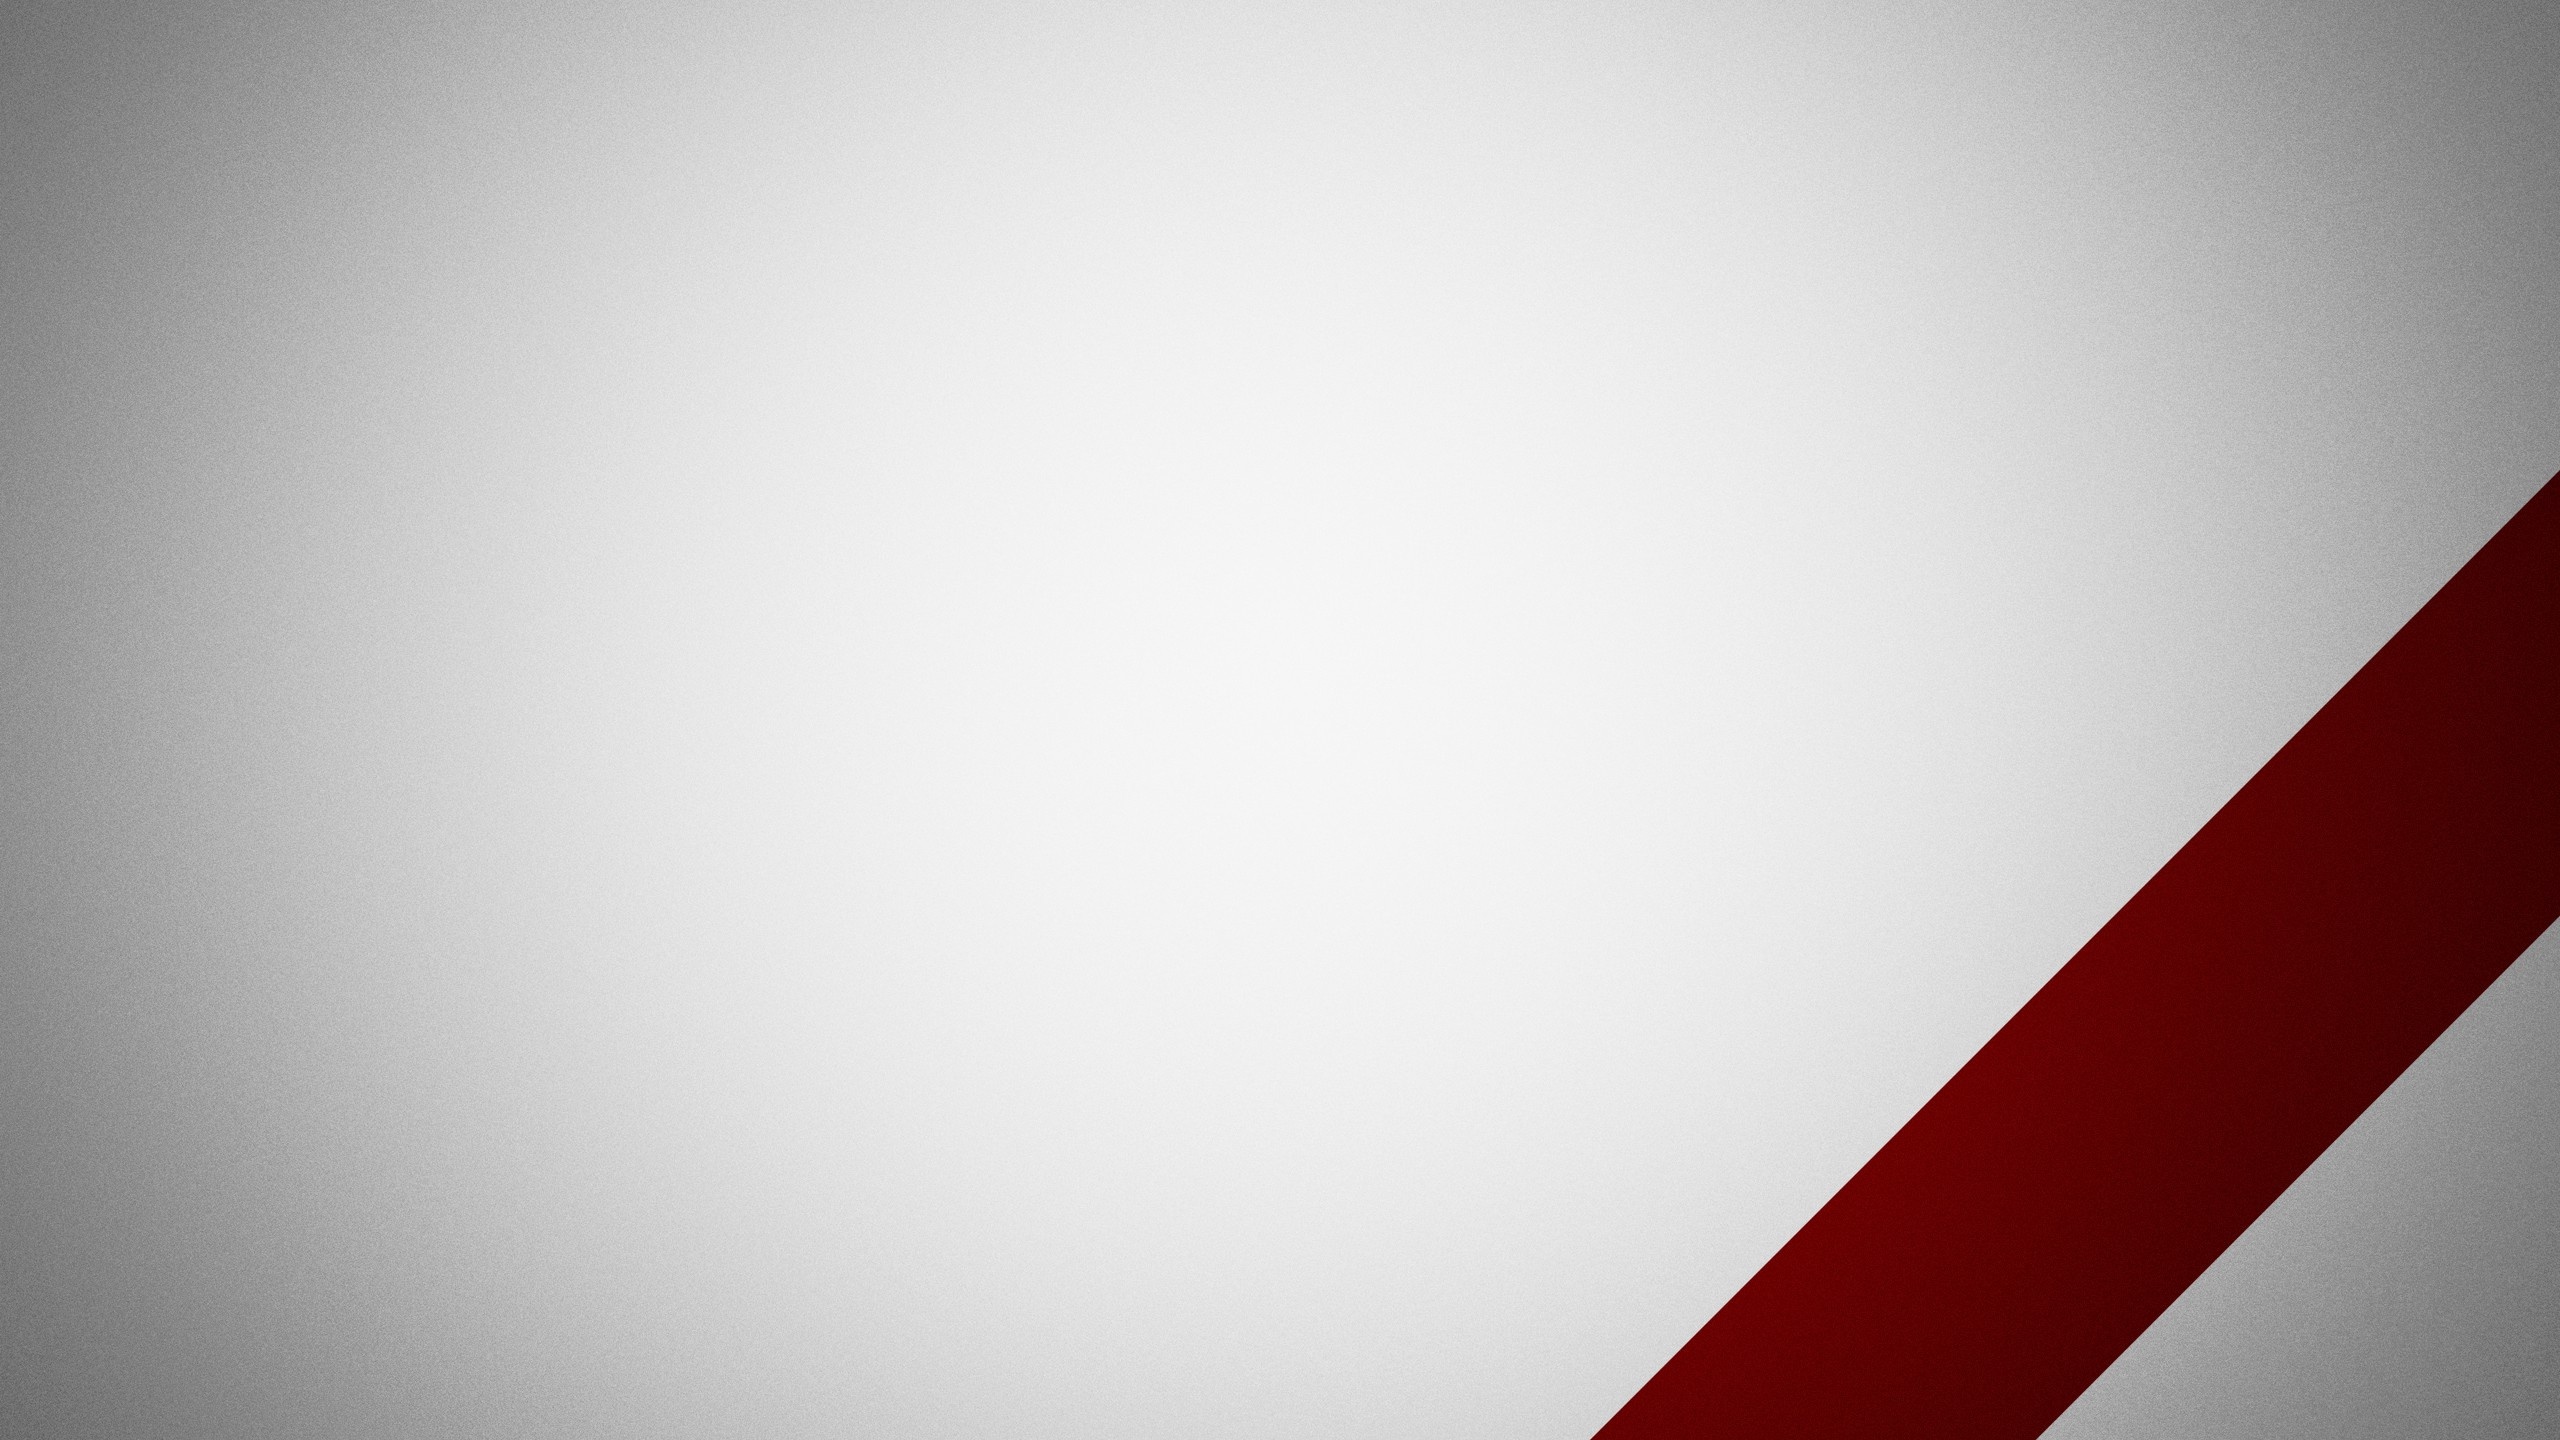 2560x1440 Red and White desktop PC and Mac wallpaper